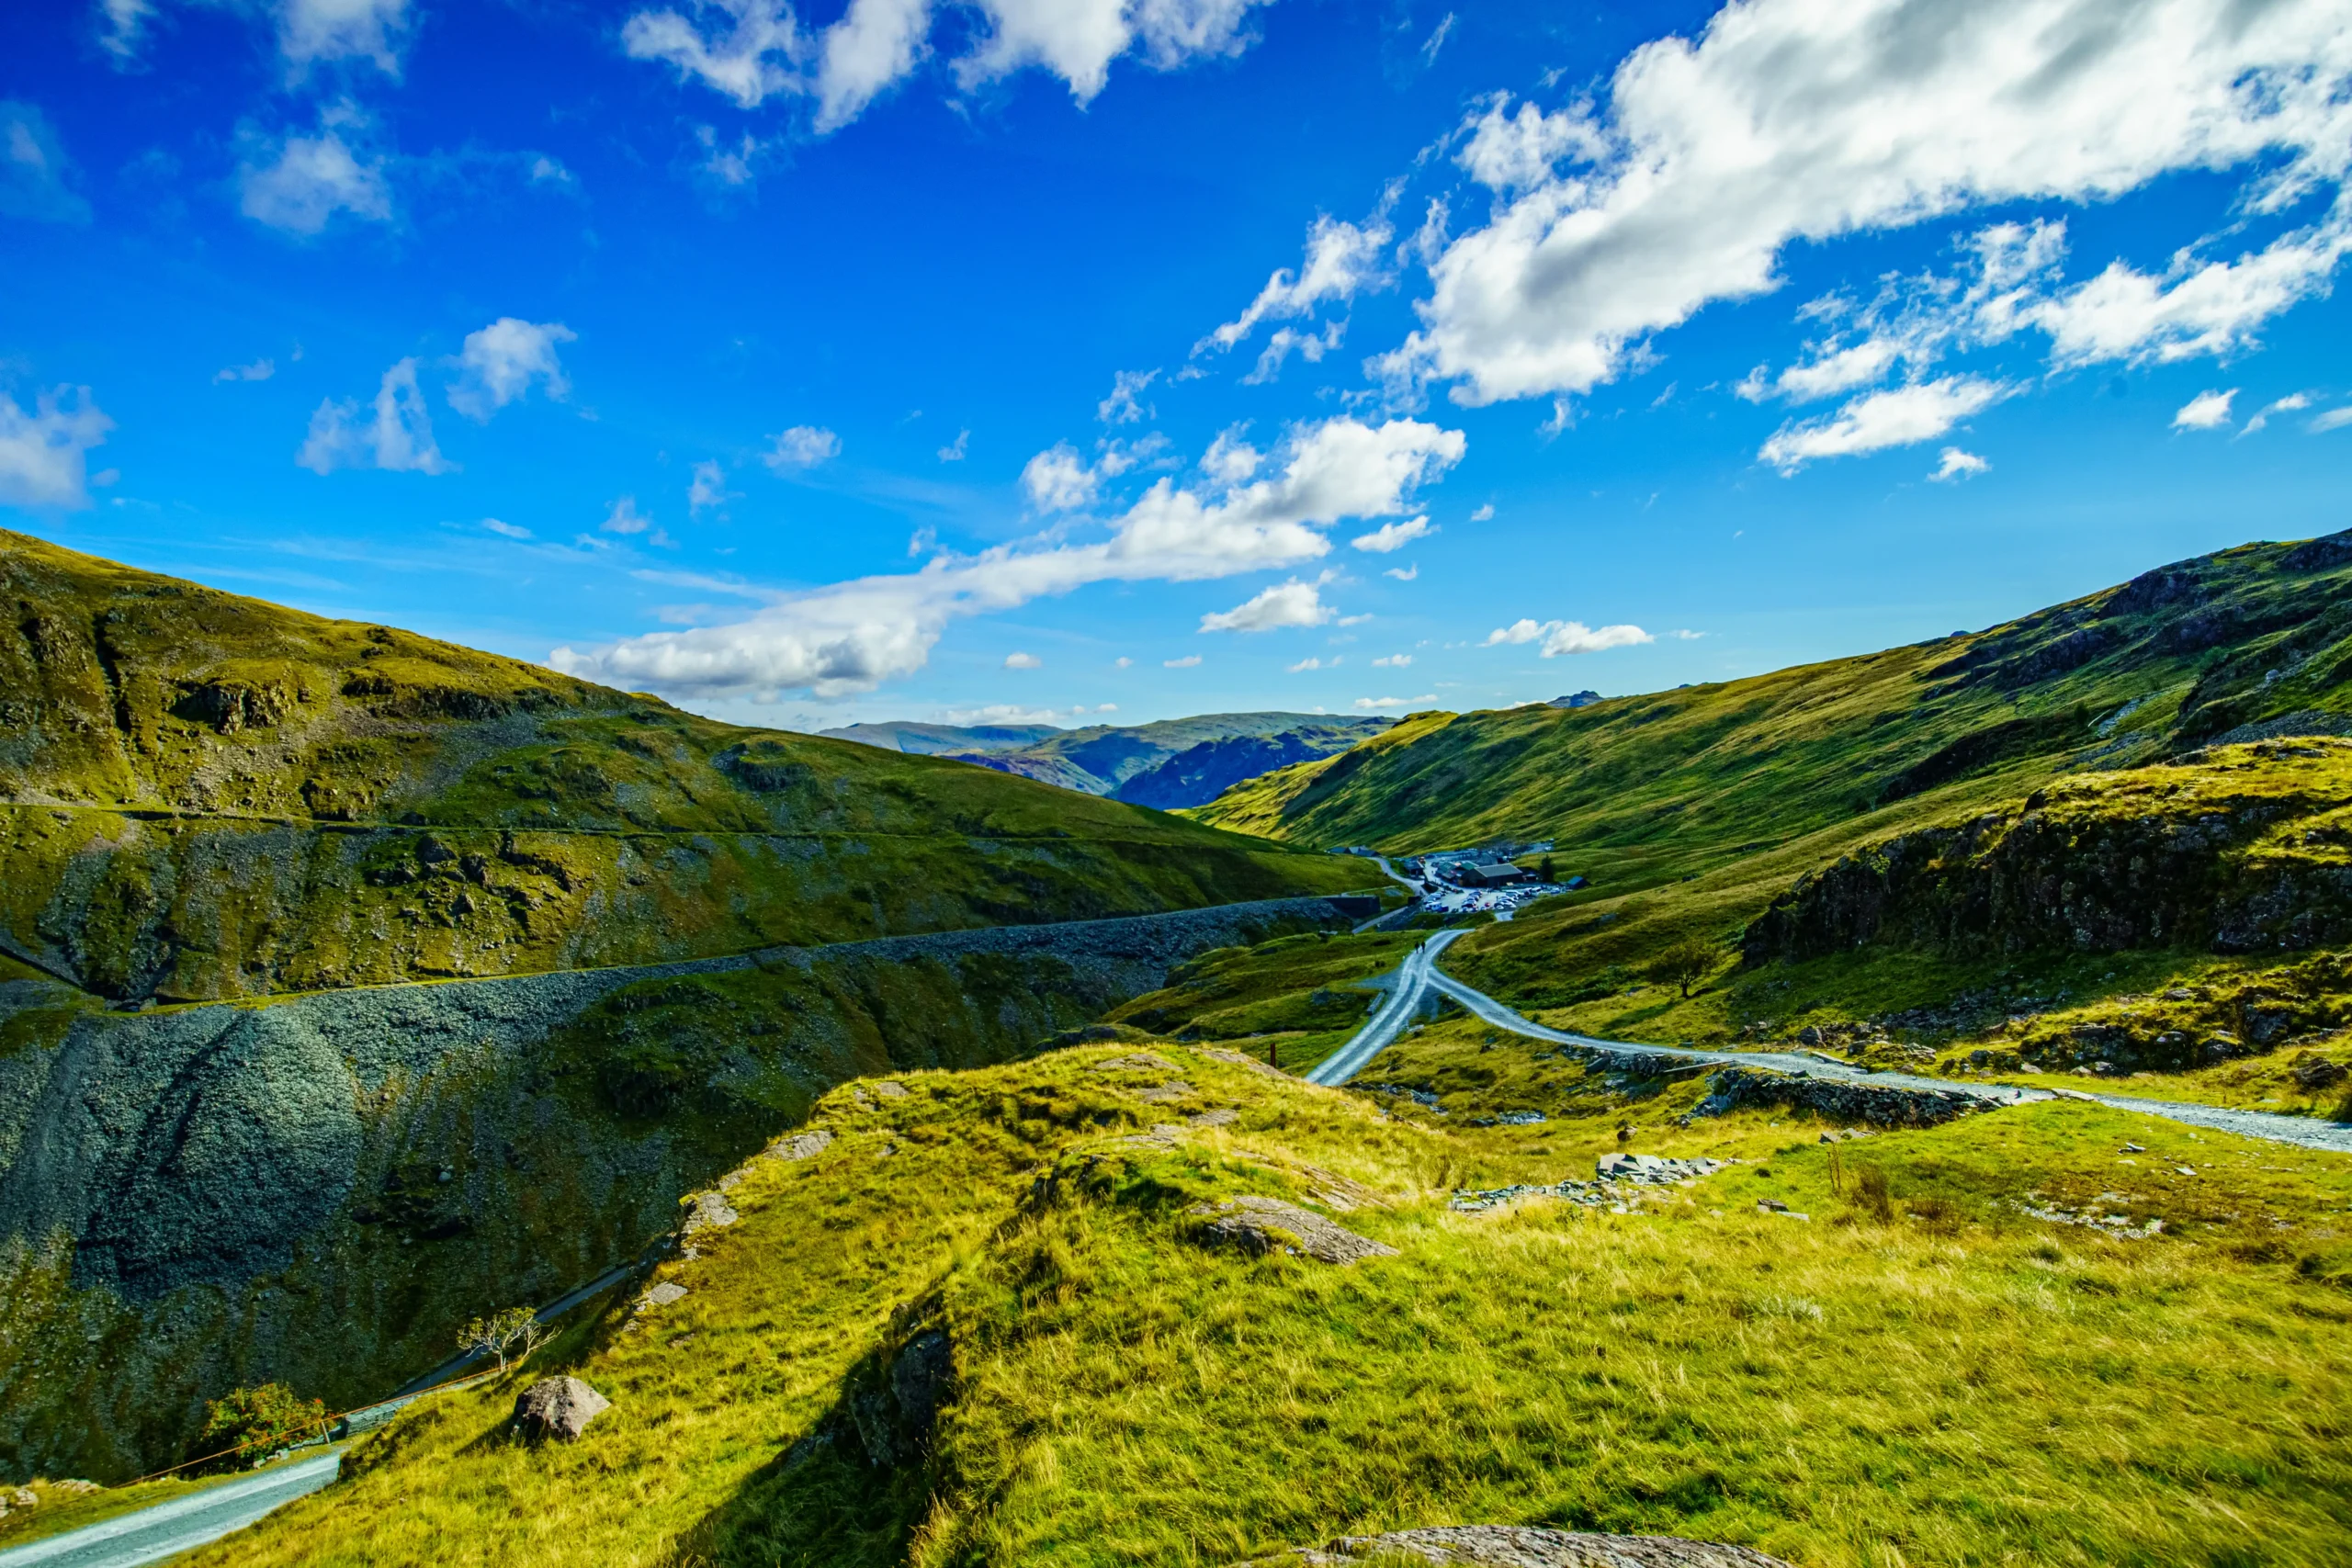 A scenic road winds through the majestic mountains of the Lake District. Nature's beauty at its finest.